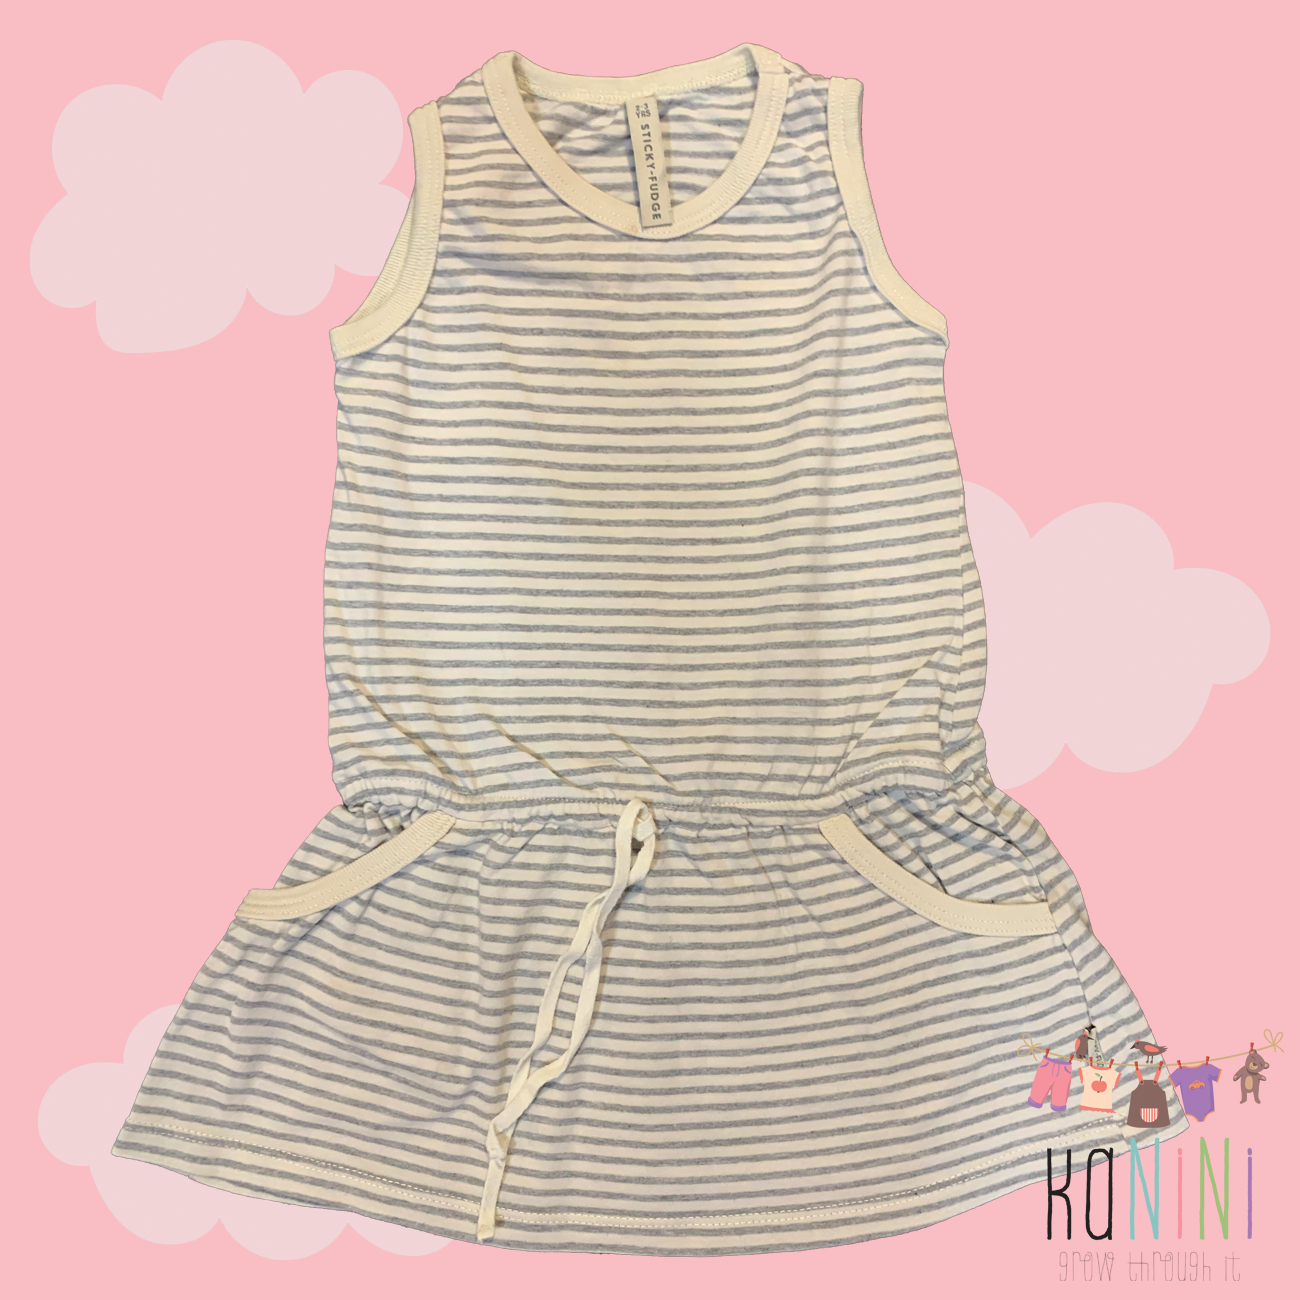 Featured image for “Sticky Fudge 2 - 3 Years Girls Stripe Dress”